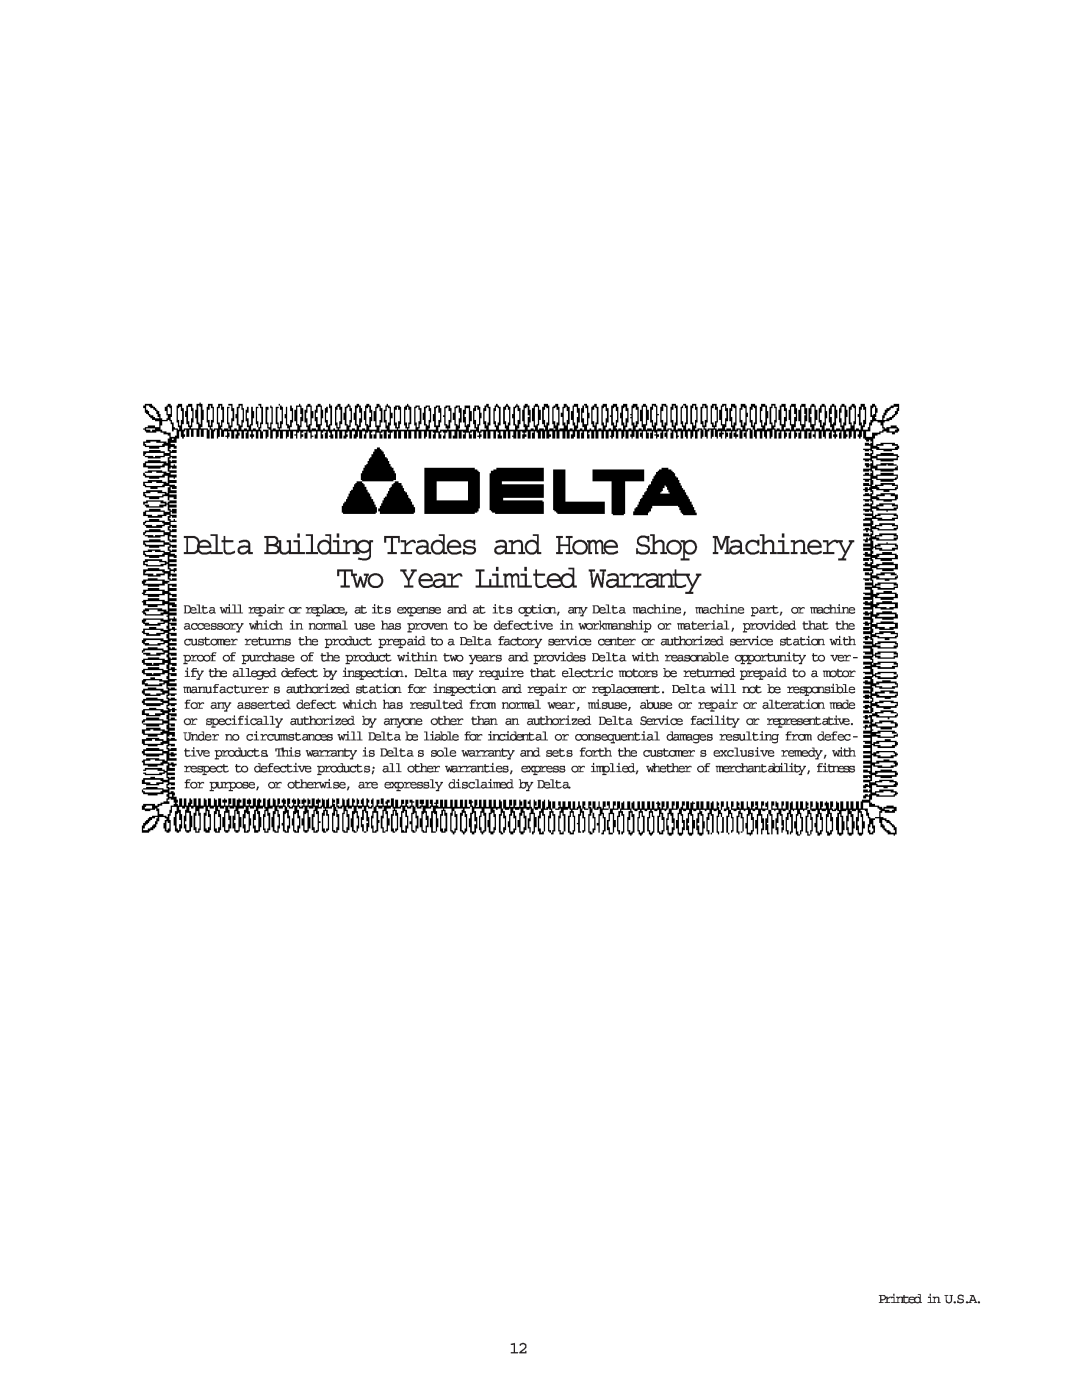 Delta 50-840 instruction manual Delta Building Trades and Home Shop Machinery, Two Year Limited Warranty, Printed in U.S.A 